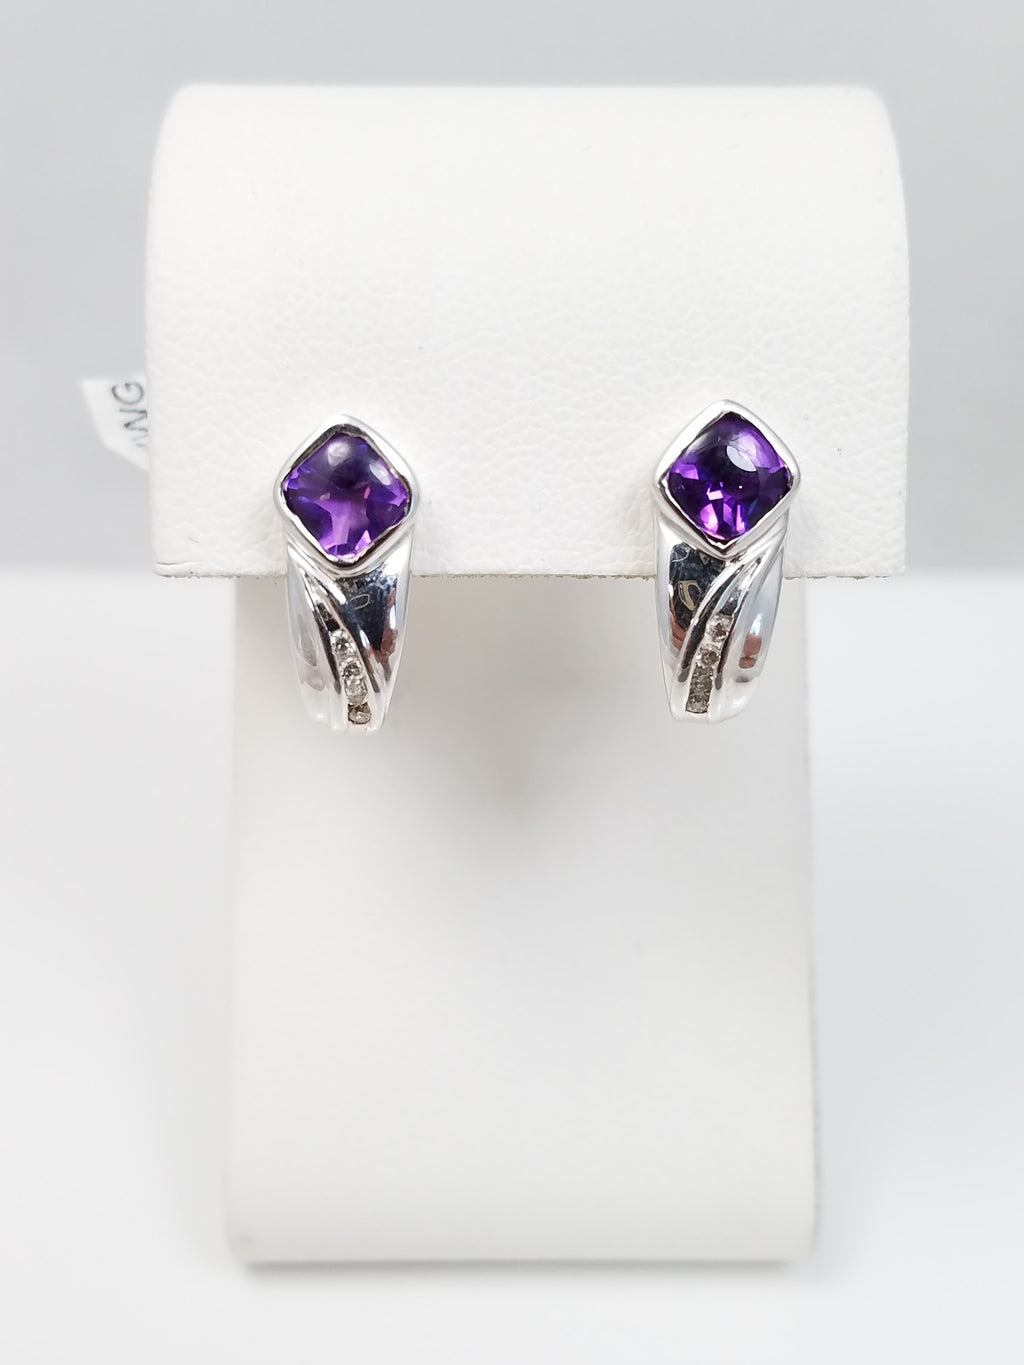 New from Store Closing! 14k White Gold Natural Amethyst + Diamond Huggie Earrings